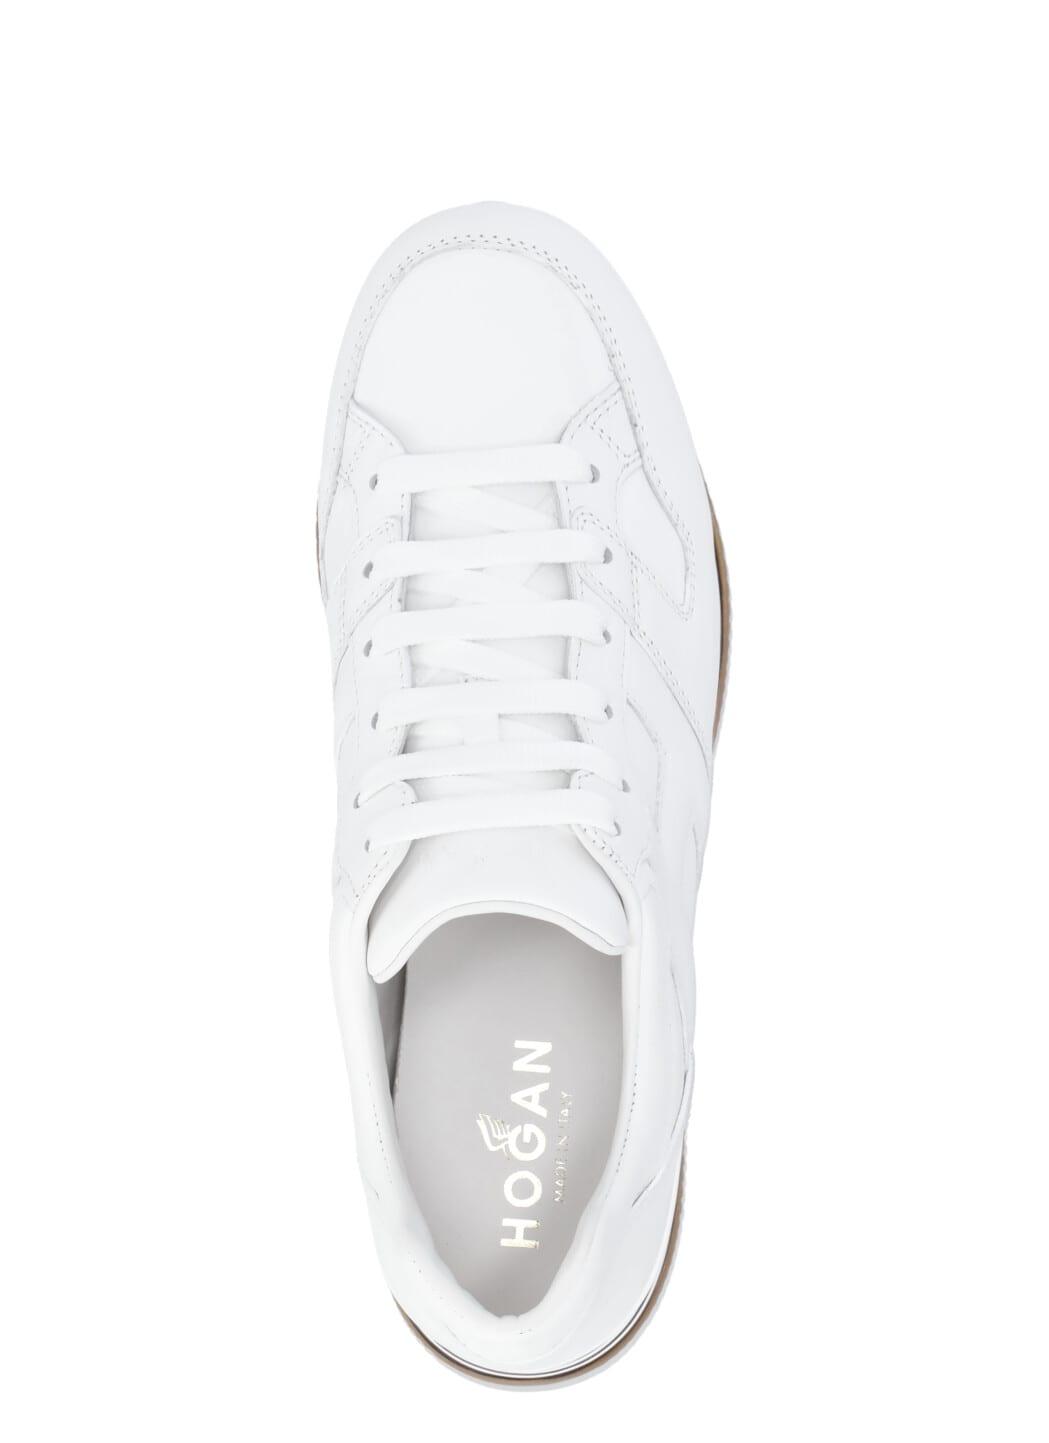 Hogan Maxi H222 Sneakers in White | Lyst